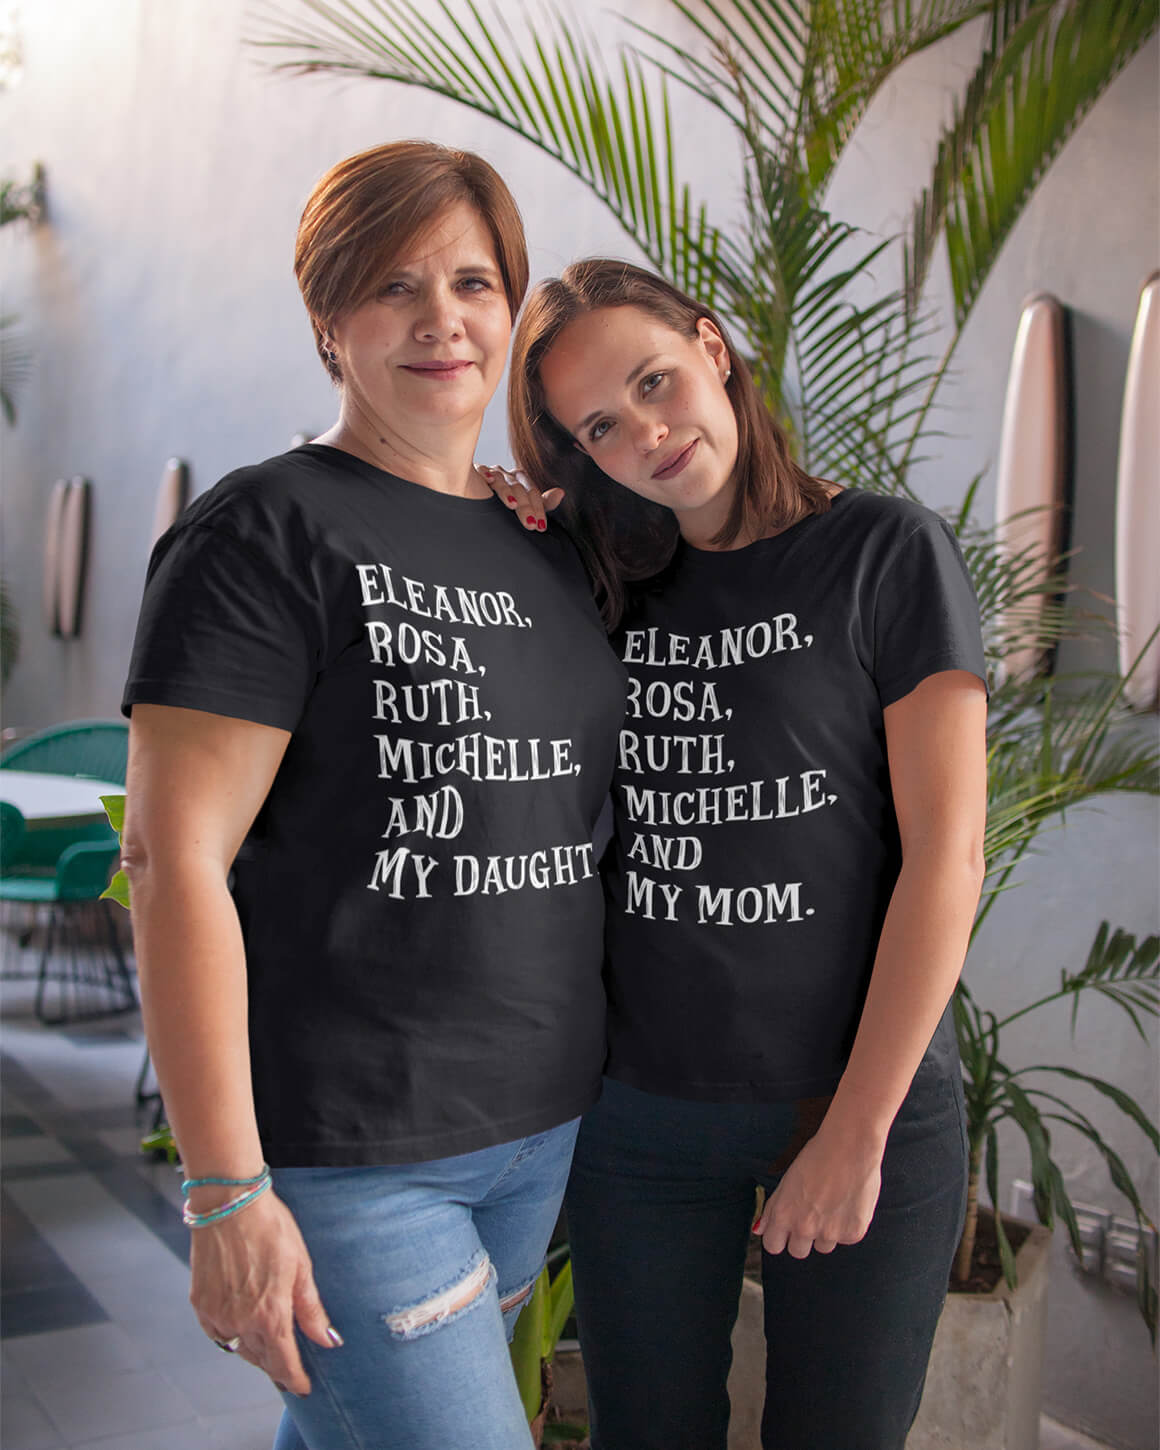 Mom and daughter wearing matching feminist name shirts